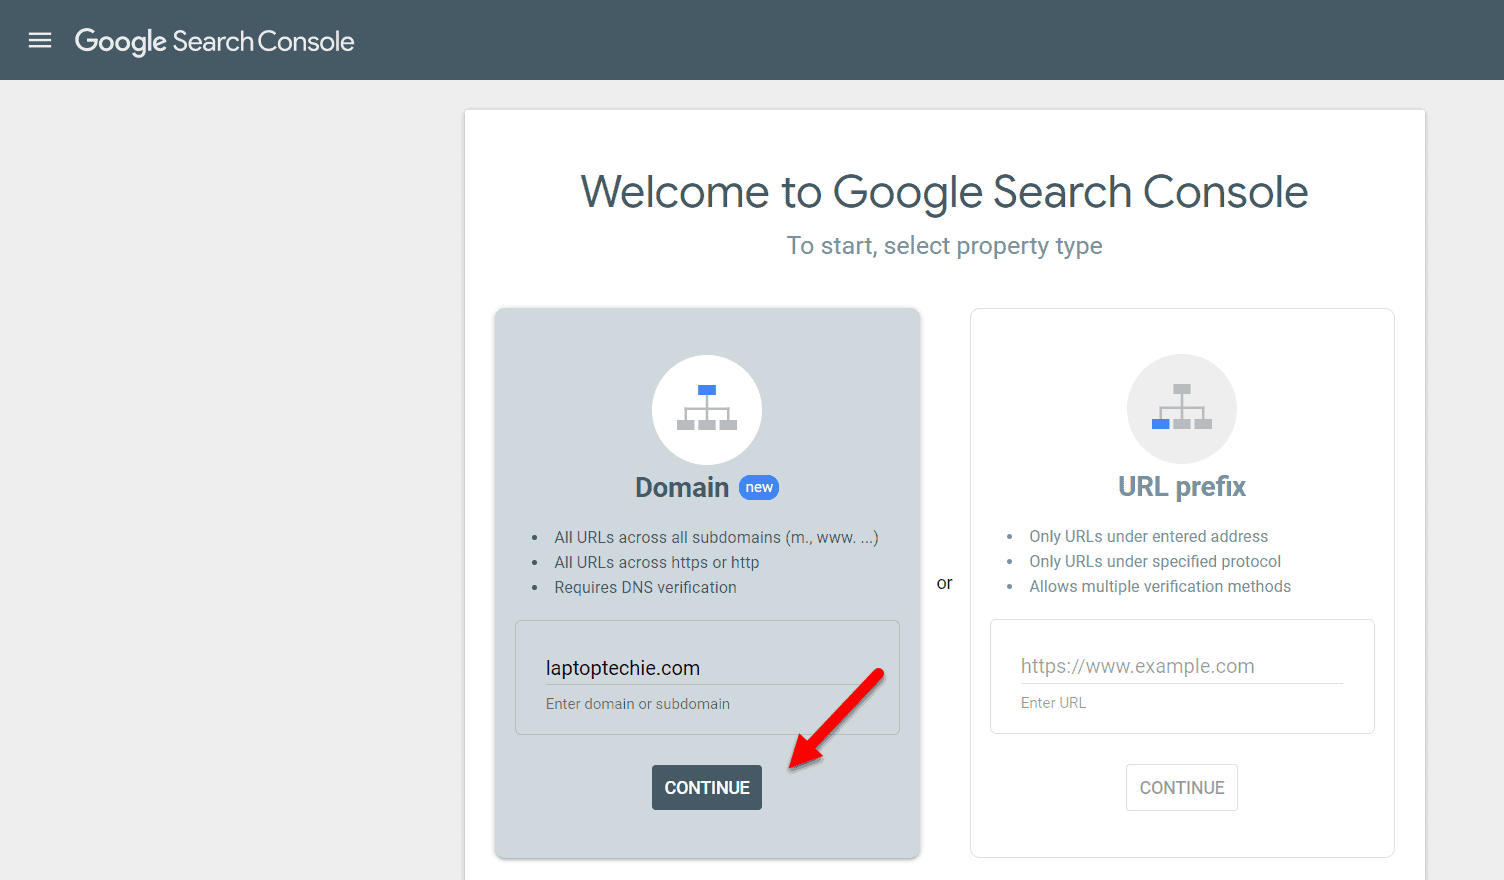 Google Search Console welcome page